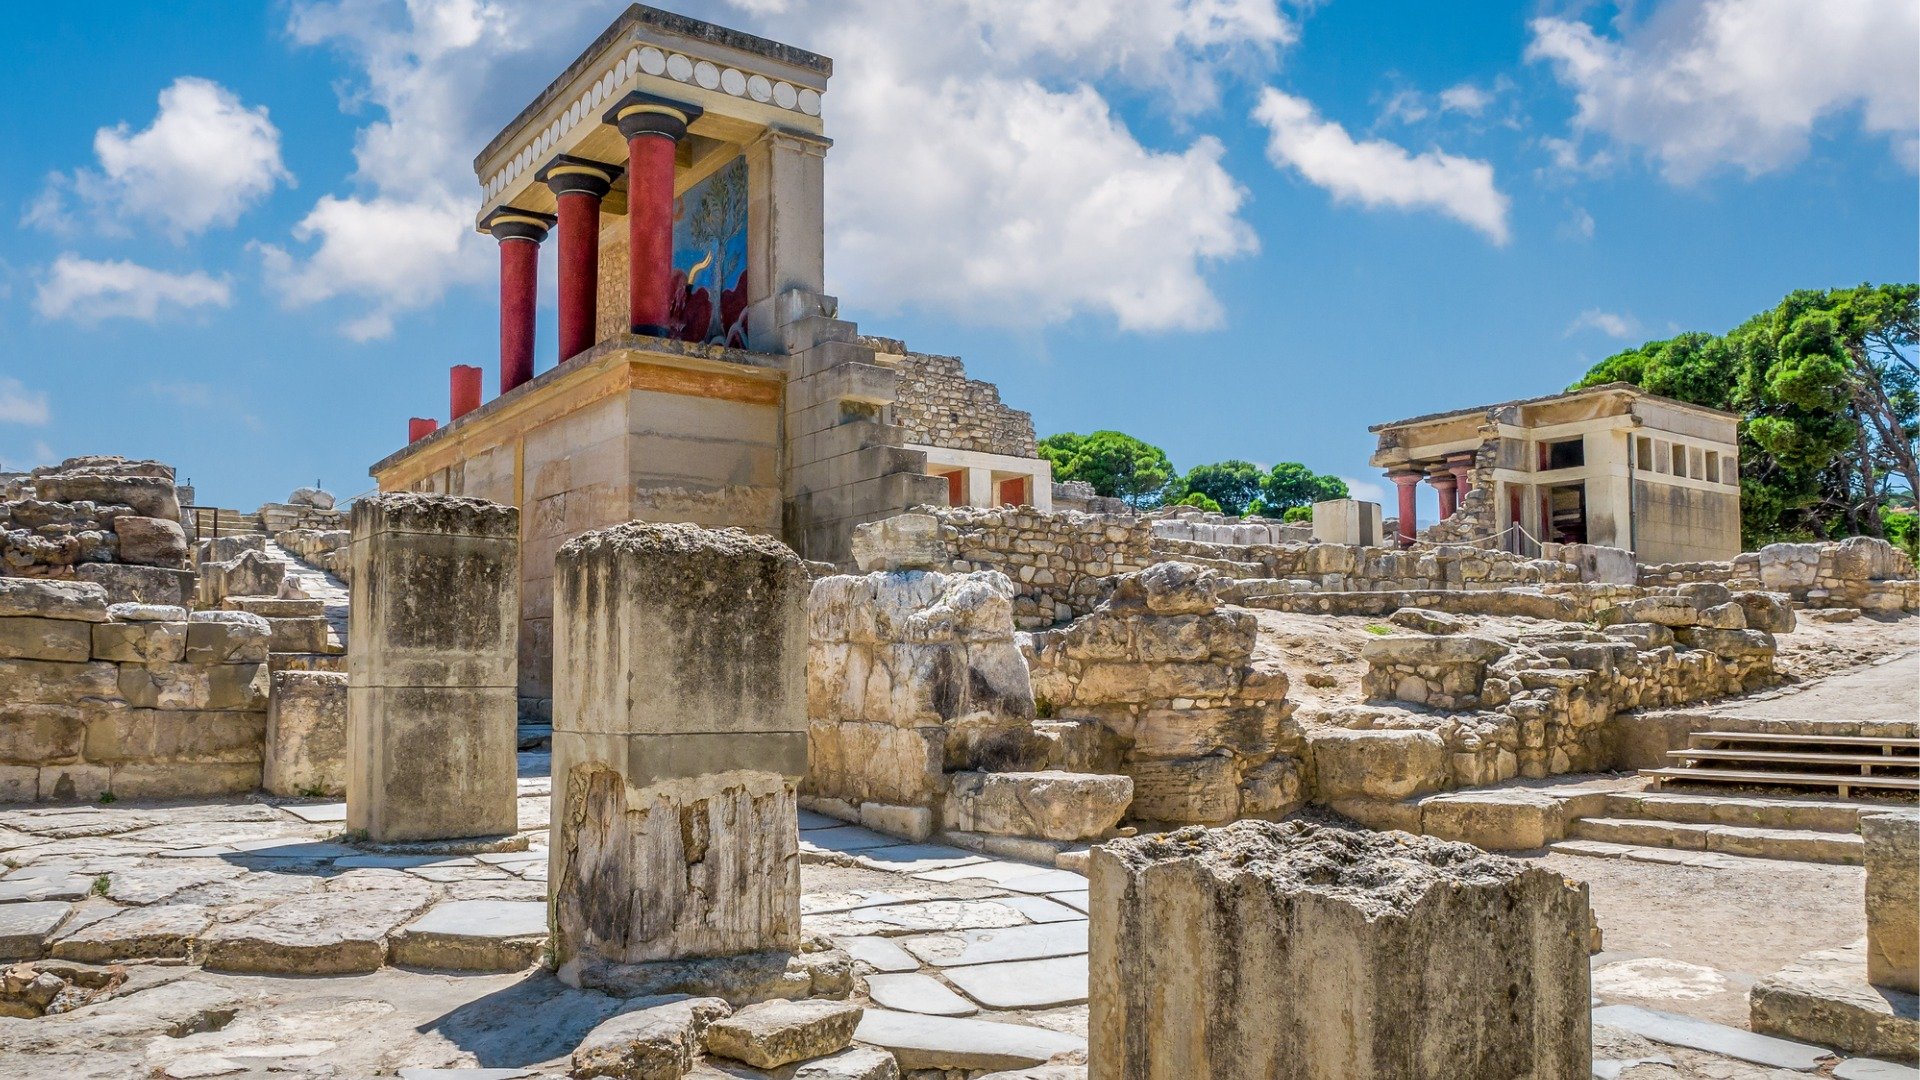 This image shows the ruins of Knossos Palace. One of the ancient buildings has bright red-colored columns. 